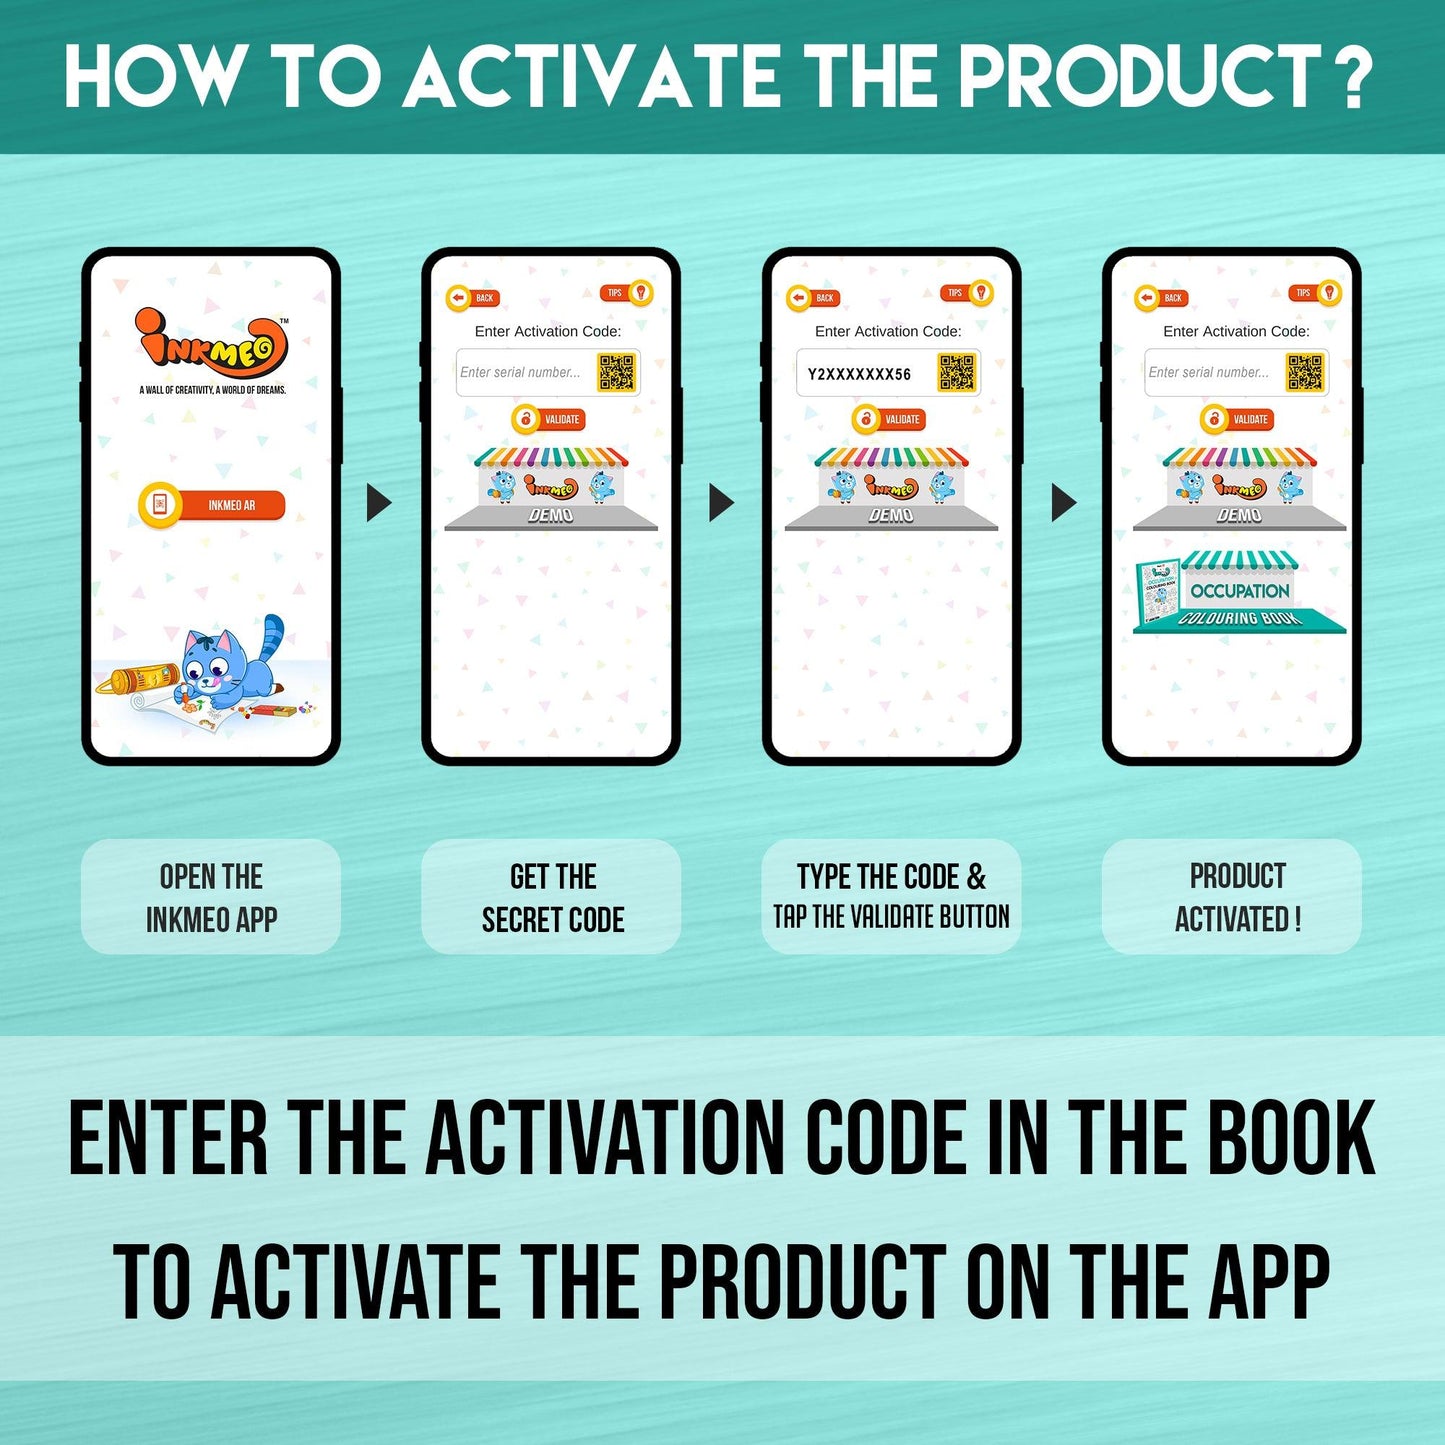  The image displays a blue background with four phones showcasing the message "To access the Inkmeo app, acquire the secret code, input the code, and tap for validation to activate the product.